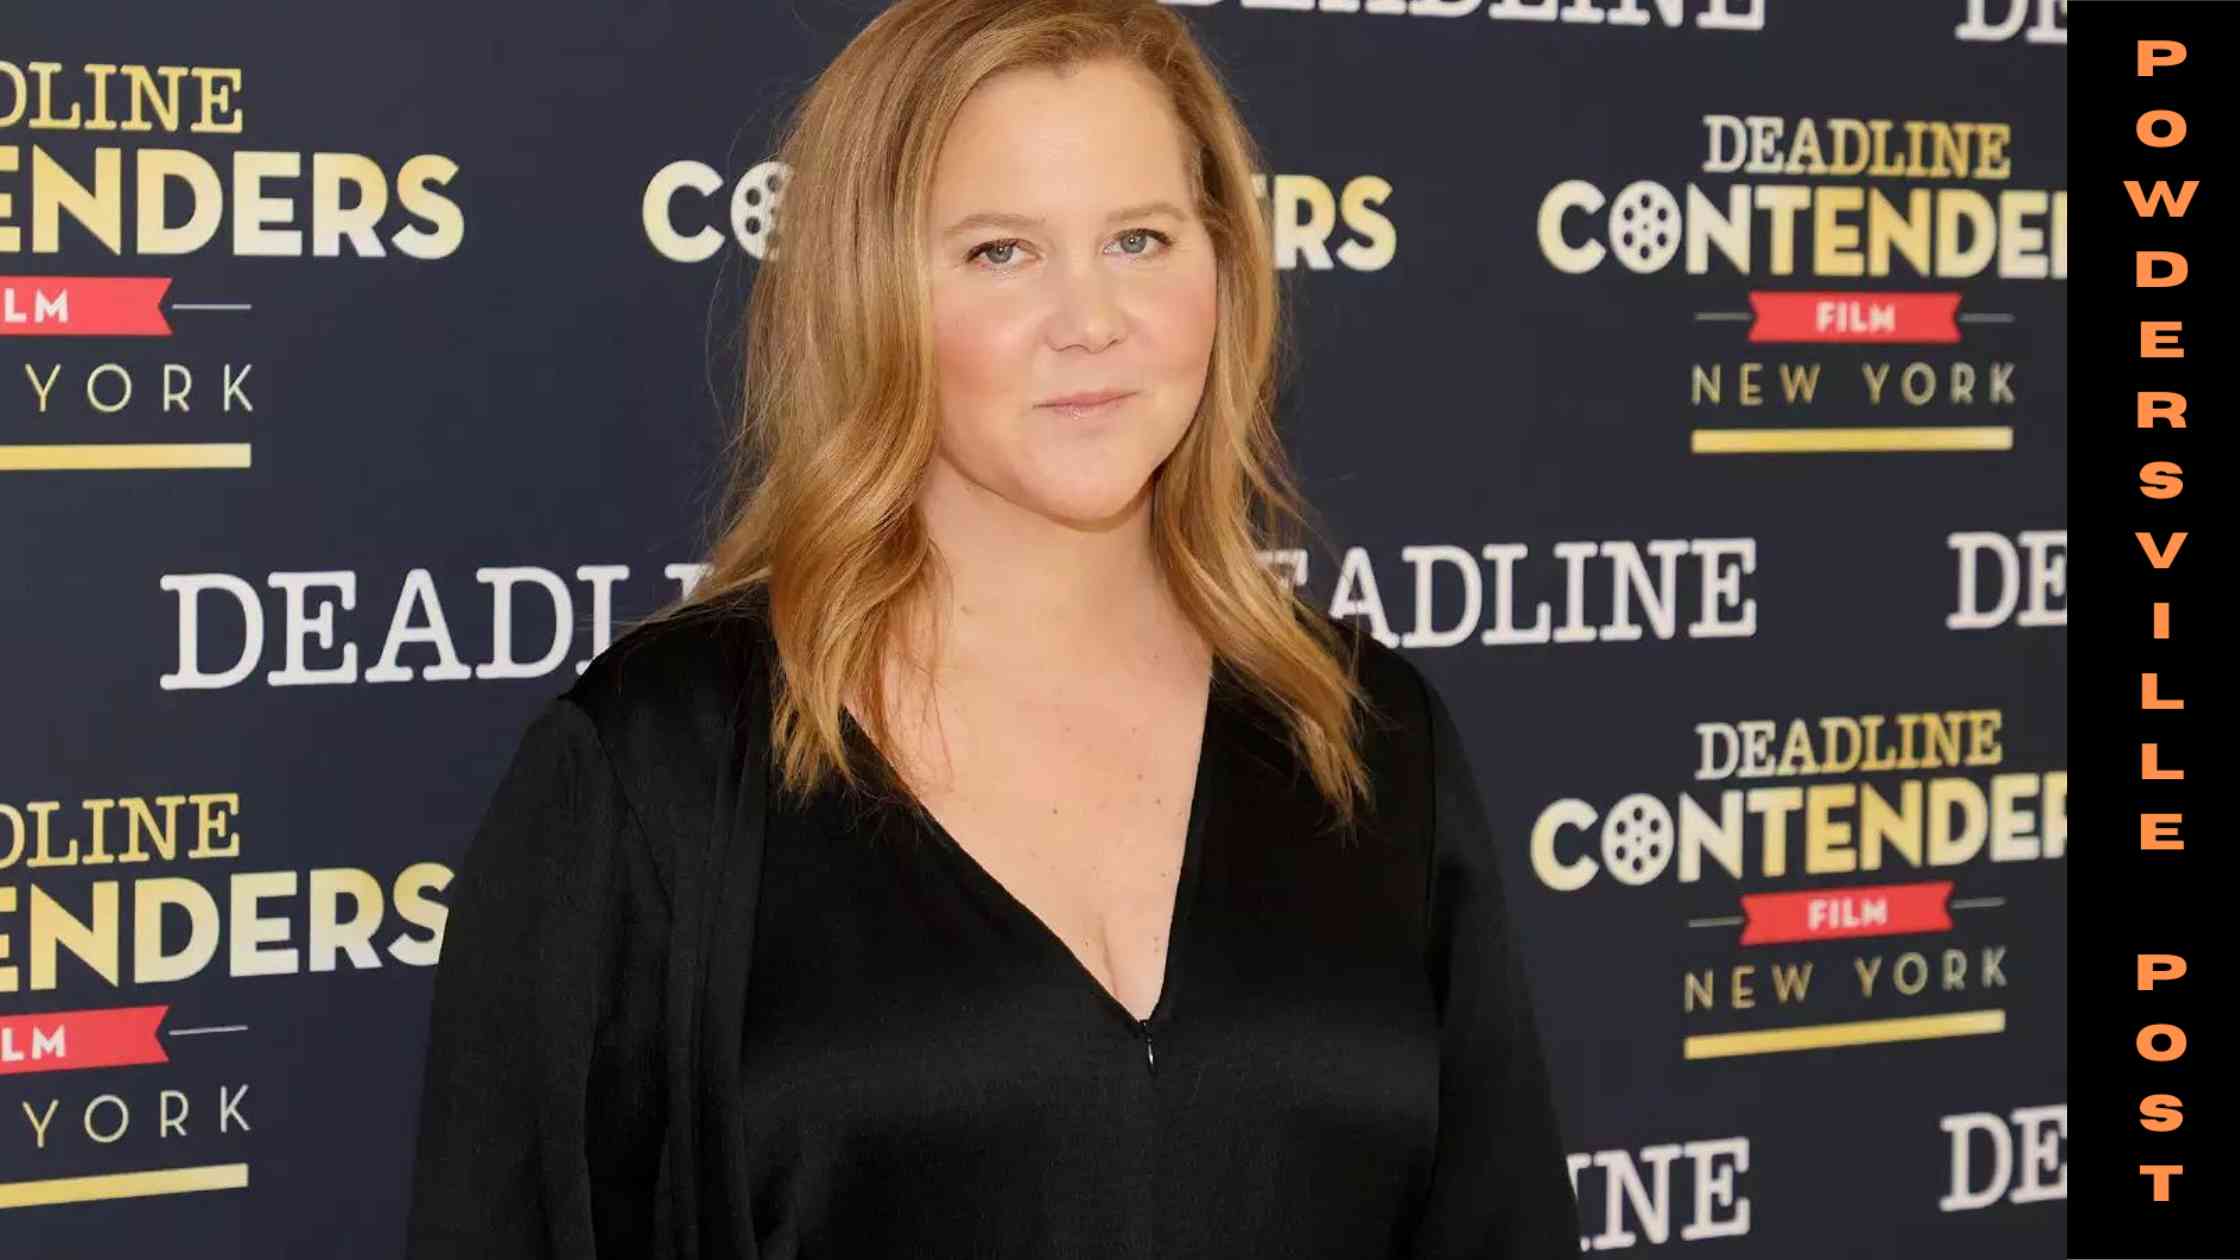 In Honor Of The Oscars, Amy Schumer Plans To Host Burn Some Bridges